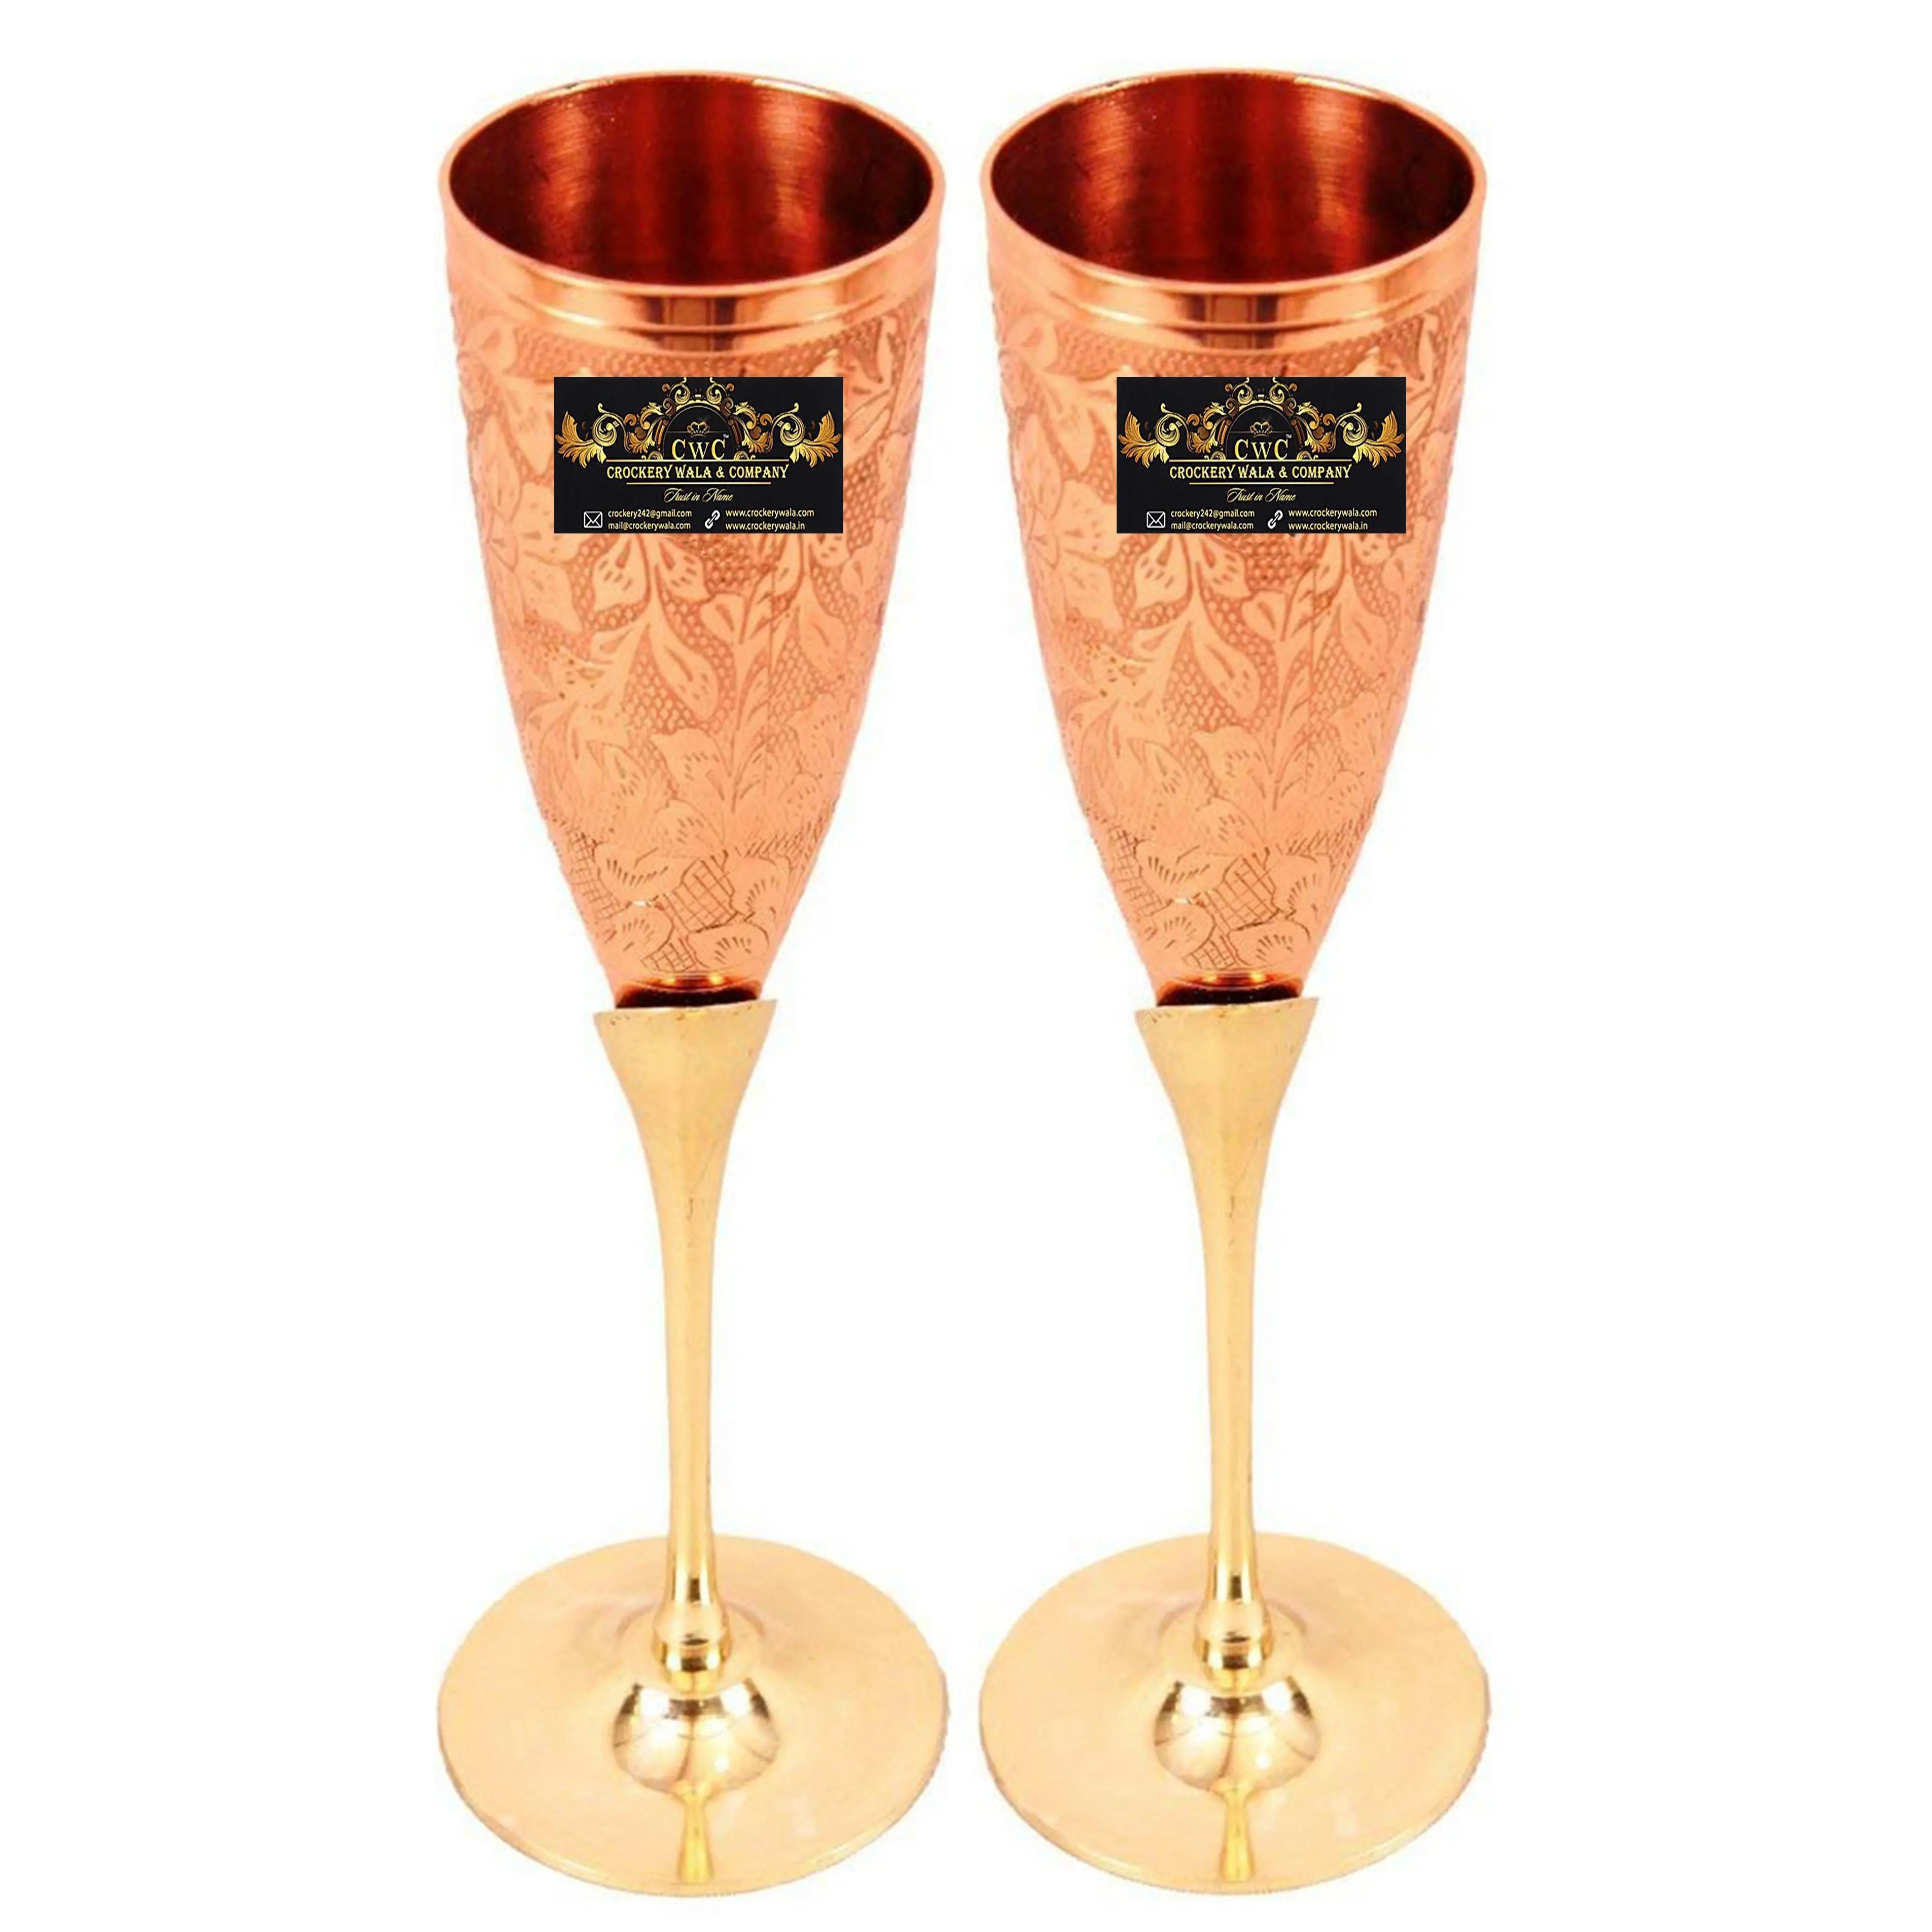 Pure Copper Champagne Flute Embossed Wine Glass For Drink & Parties Set of 2 Glass - CROCKERY WALA AND COMPANY 